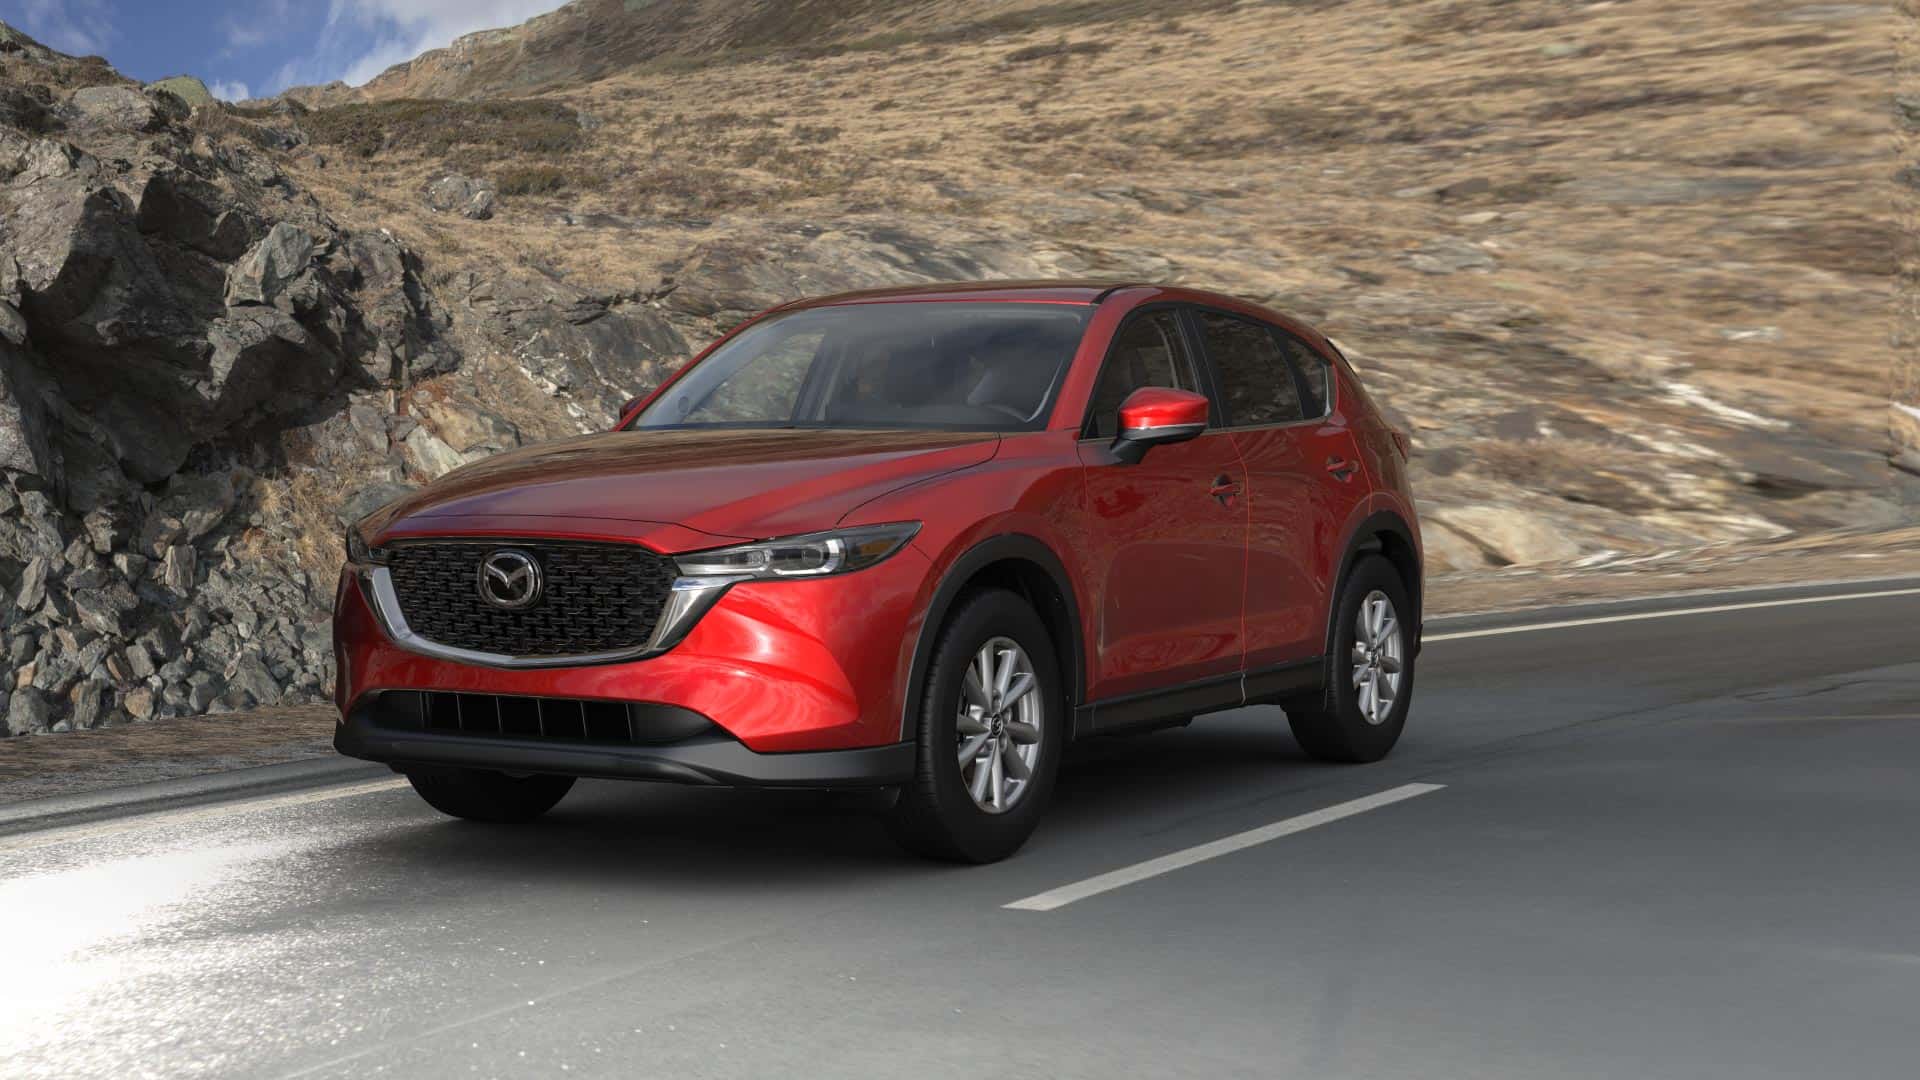 2023 Mazda CX-5 2.5 S Select Soul Red Crystal Metallic | Mazda of South Charlotte in Pineville NC